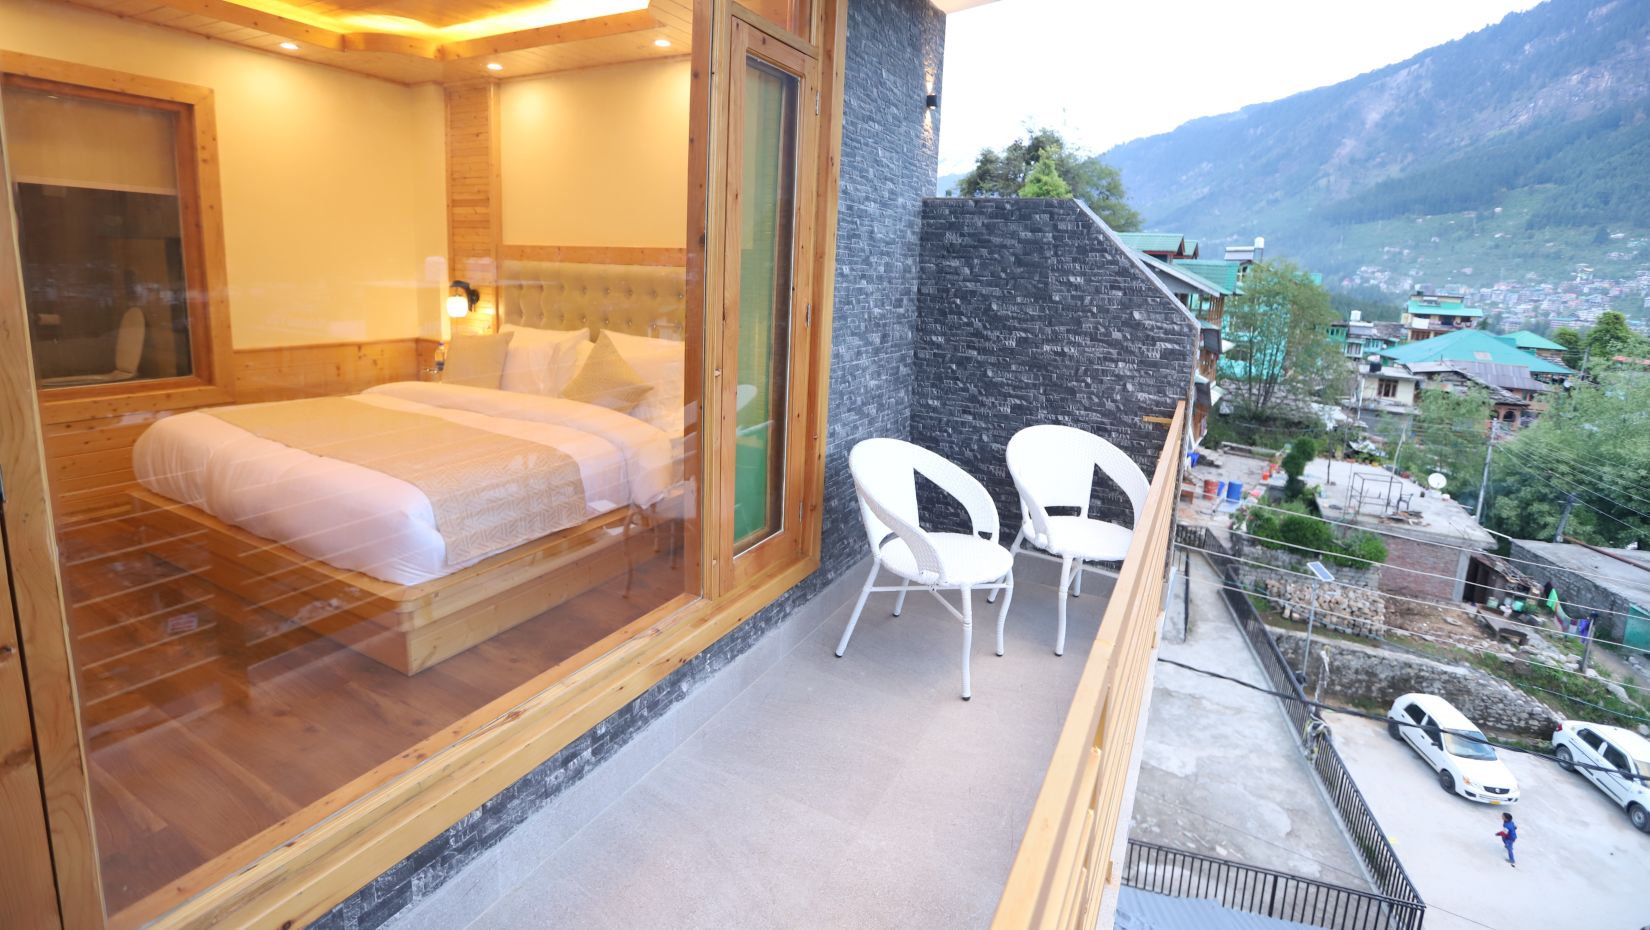 exterior view of the premium room balcony with 2 chairs and a beautiful location as the backdrop - Golden Wood Manali By Rosetum